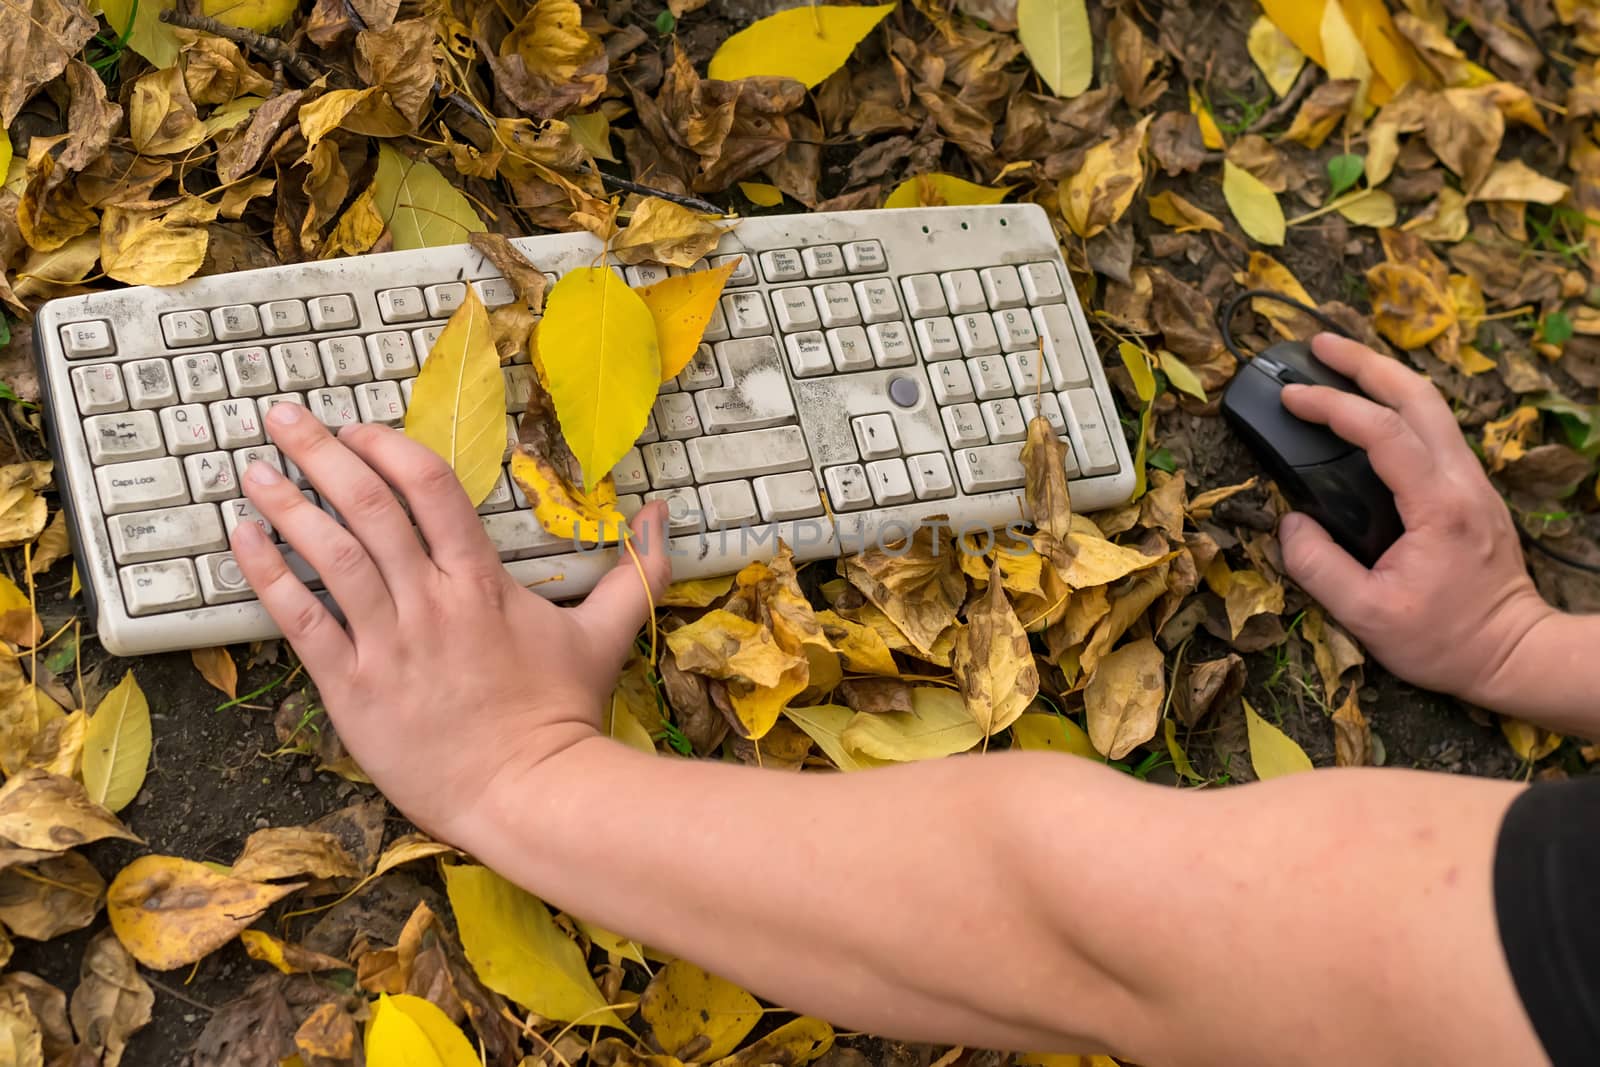 Autumn, a man working at a computer on a fallen yellow foliage in the city by jk3030